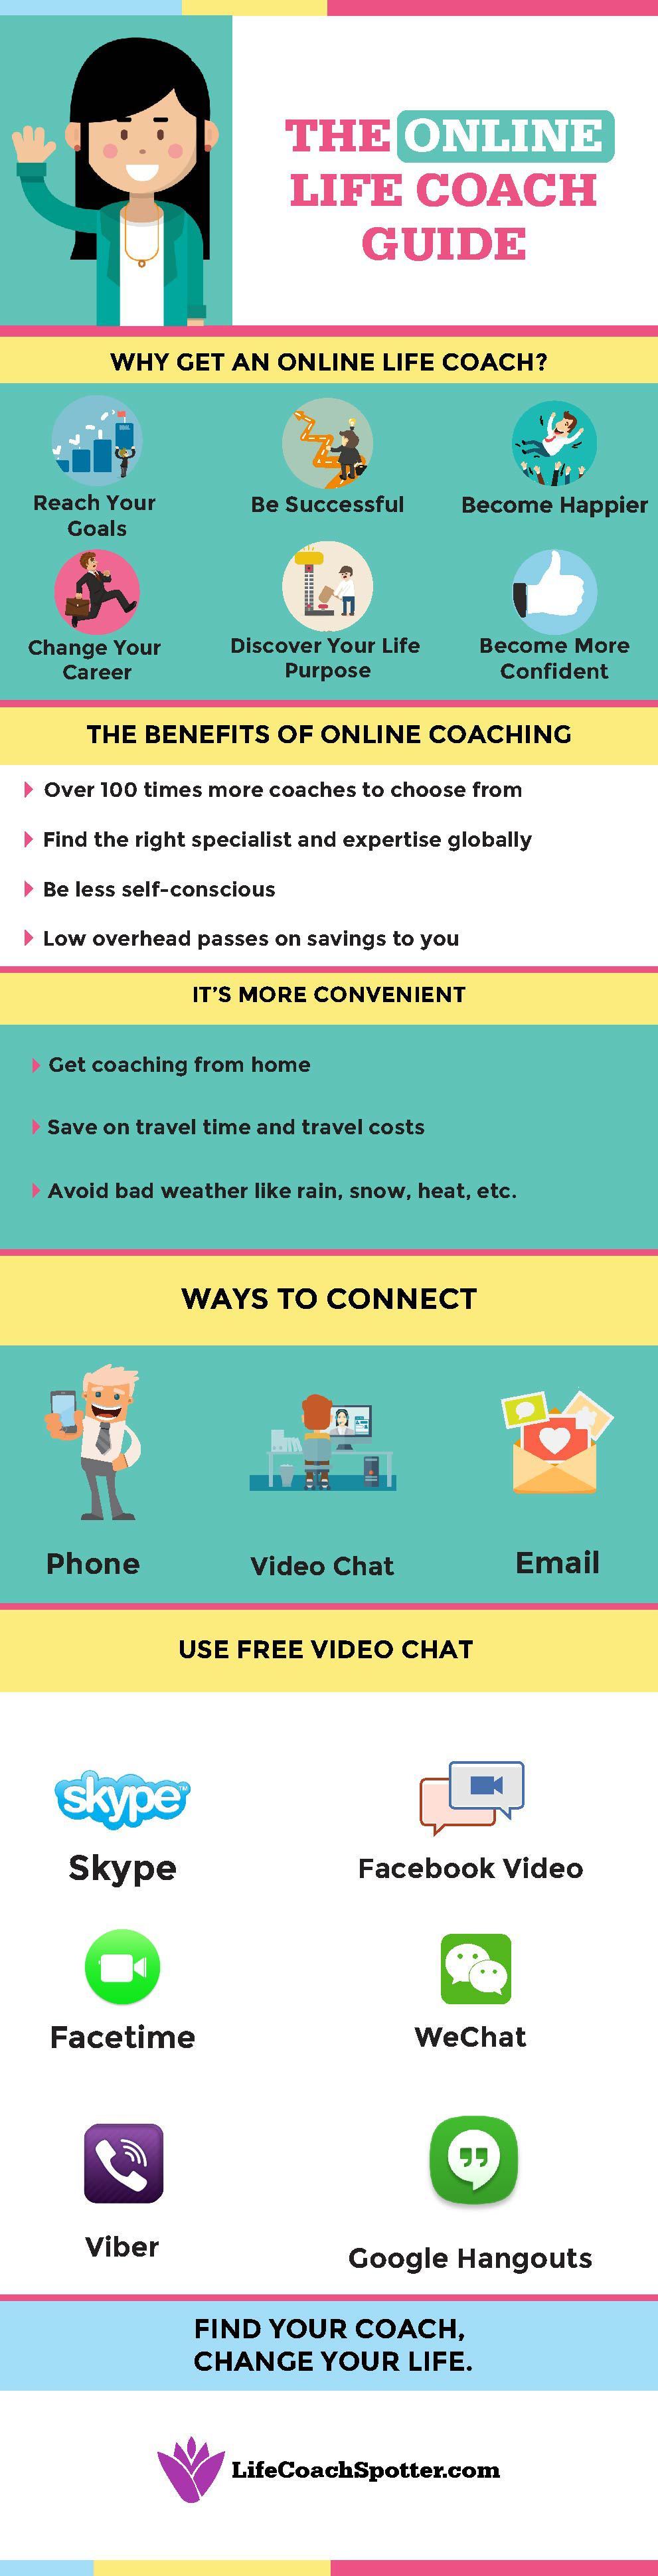 The Online Life Coach Guide Infographic